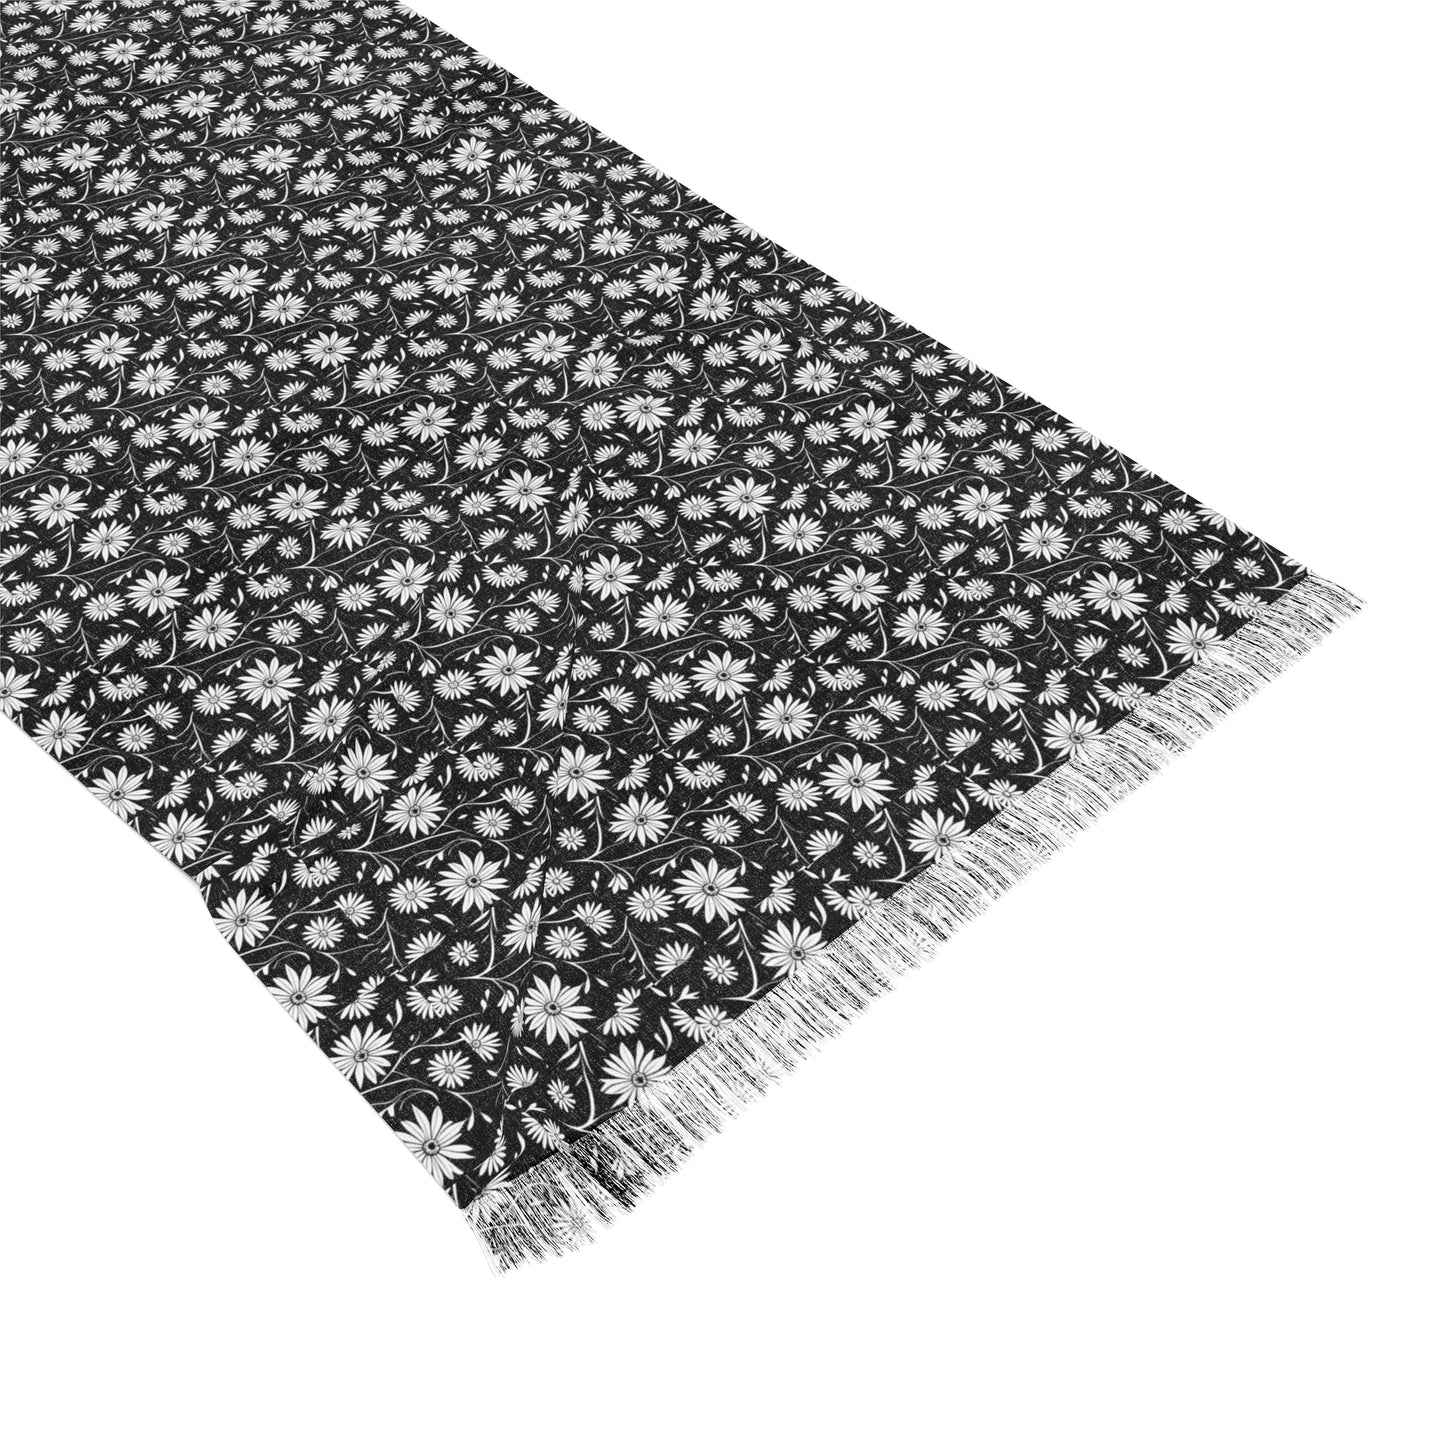 Field of Scandinavian Black and White Daisies 1970s Floral Pattern Decorative Fashion Light Scarf with Fringe